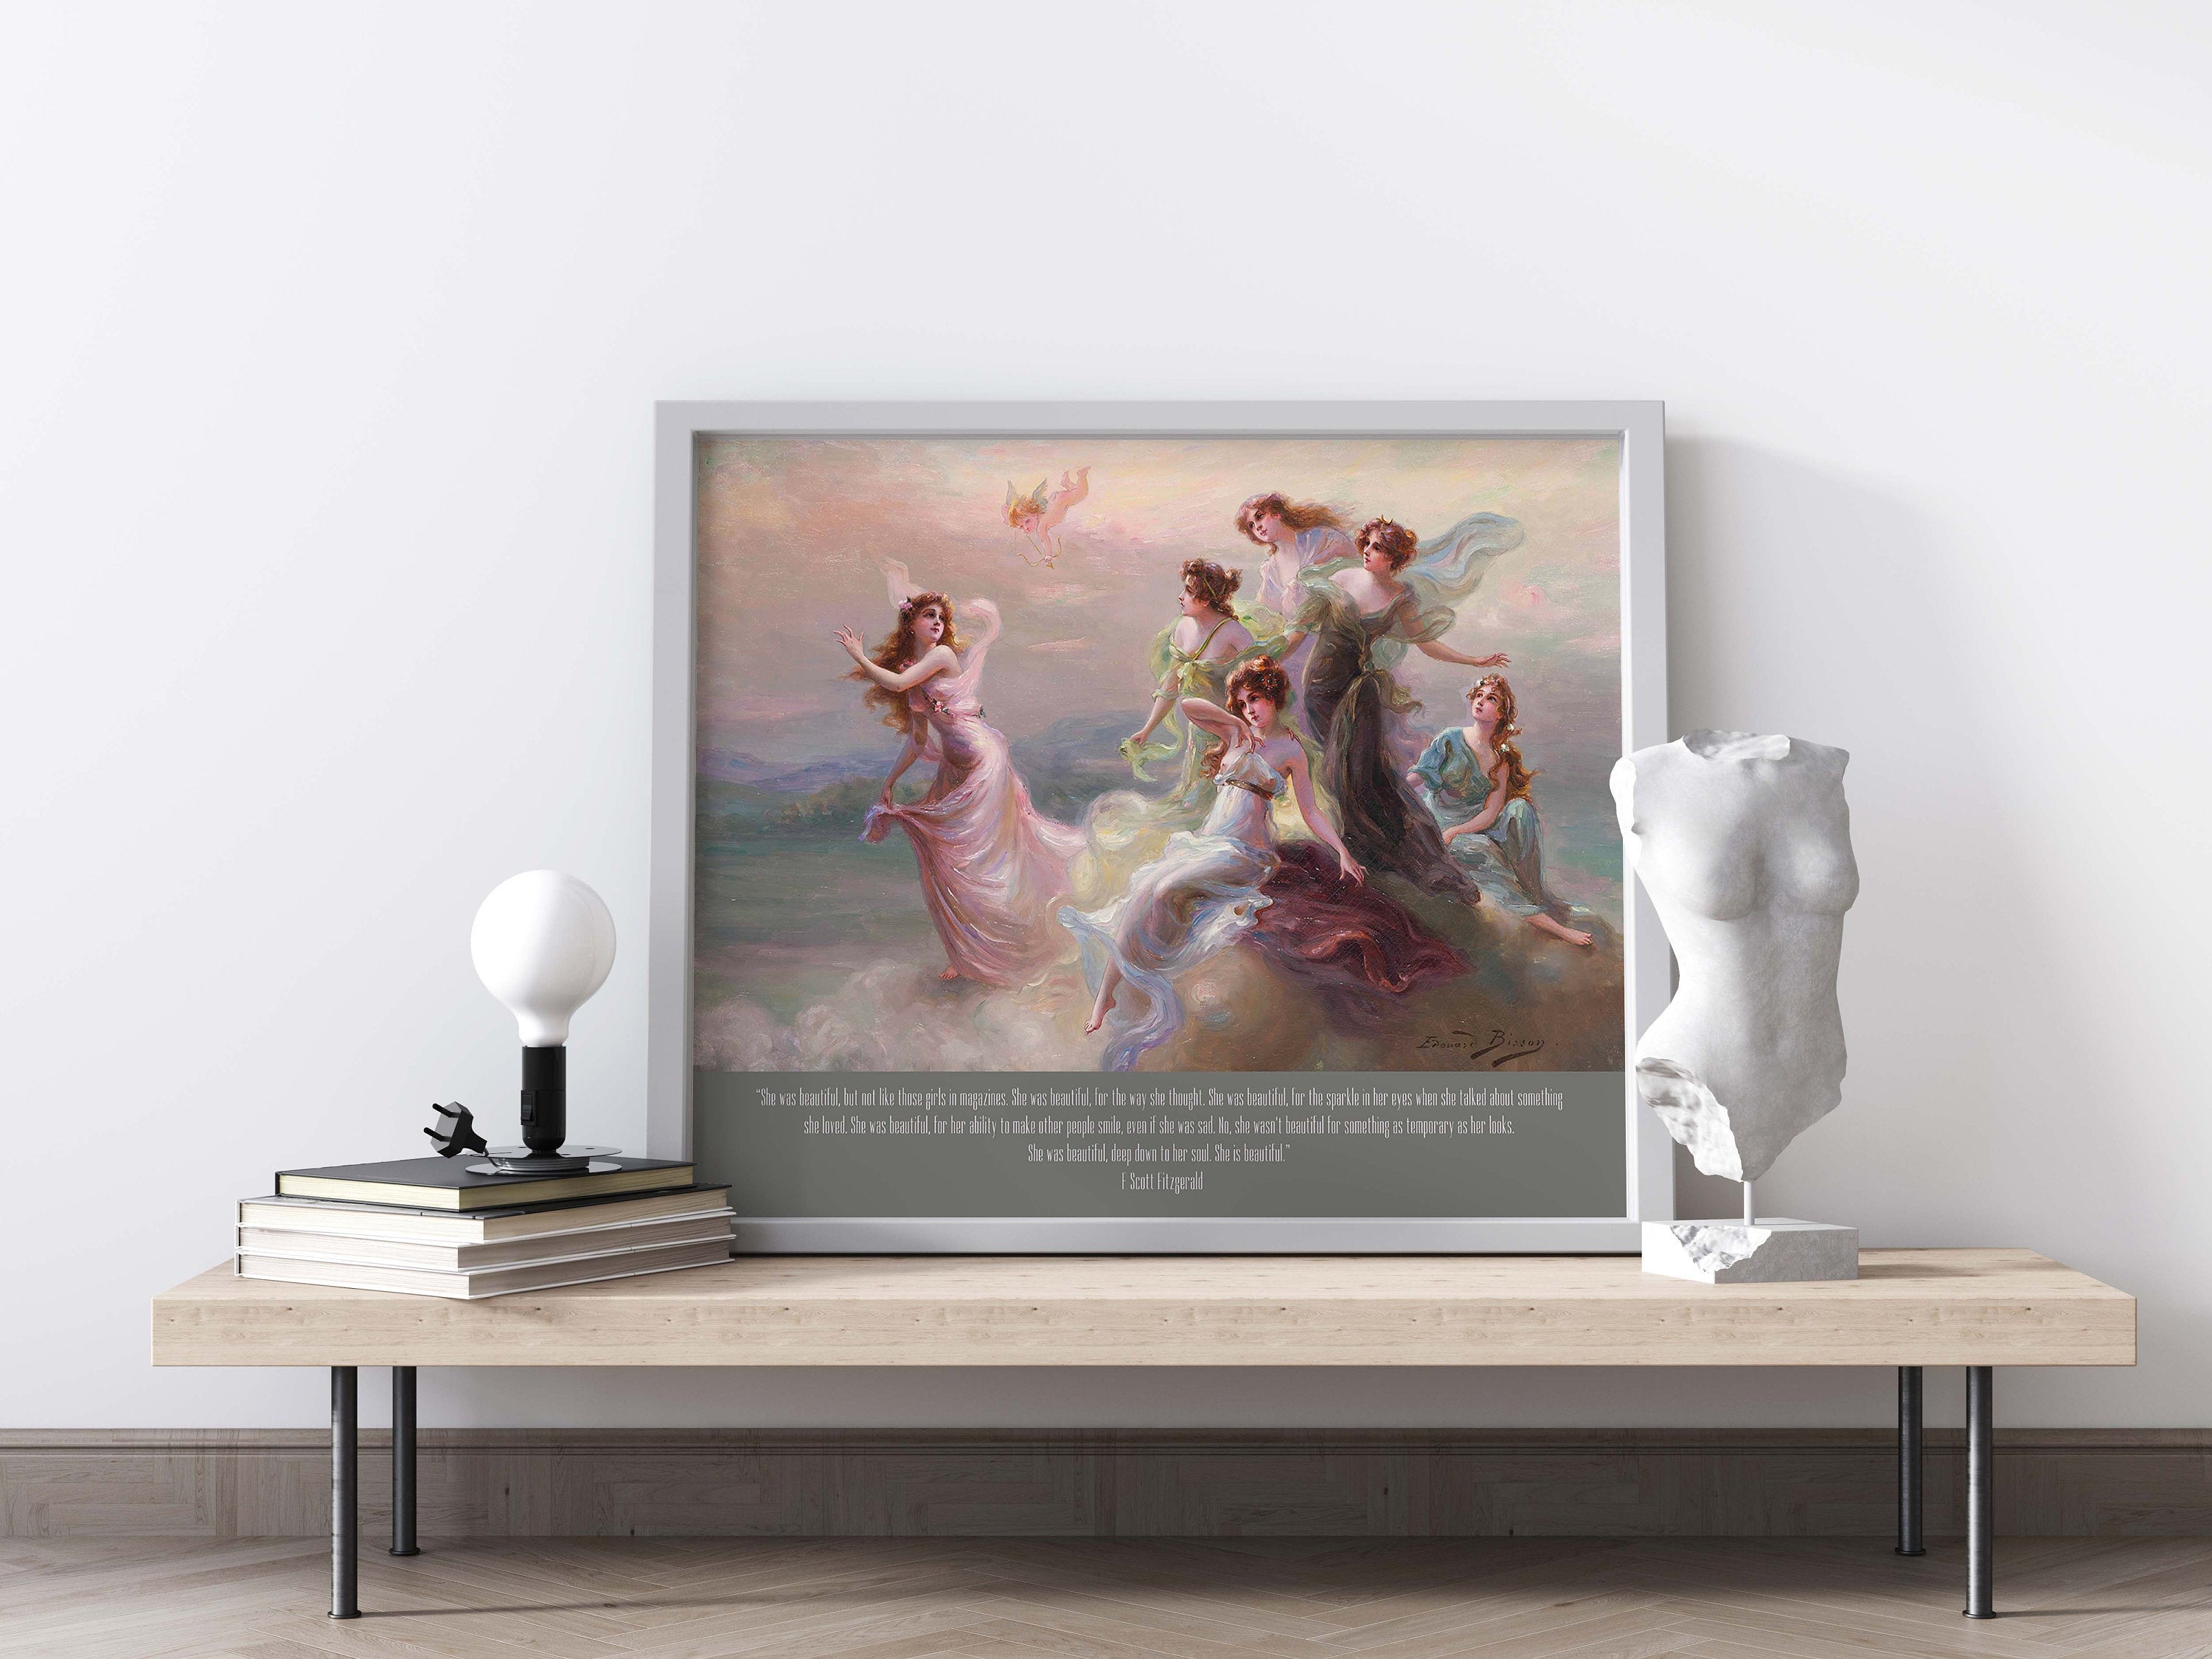 F Scott Fitzgerald She Was Beautiful and Edouard Bisson Fine Art Print, Dance of the Nymphs